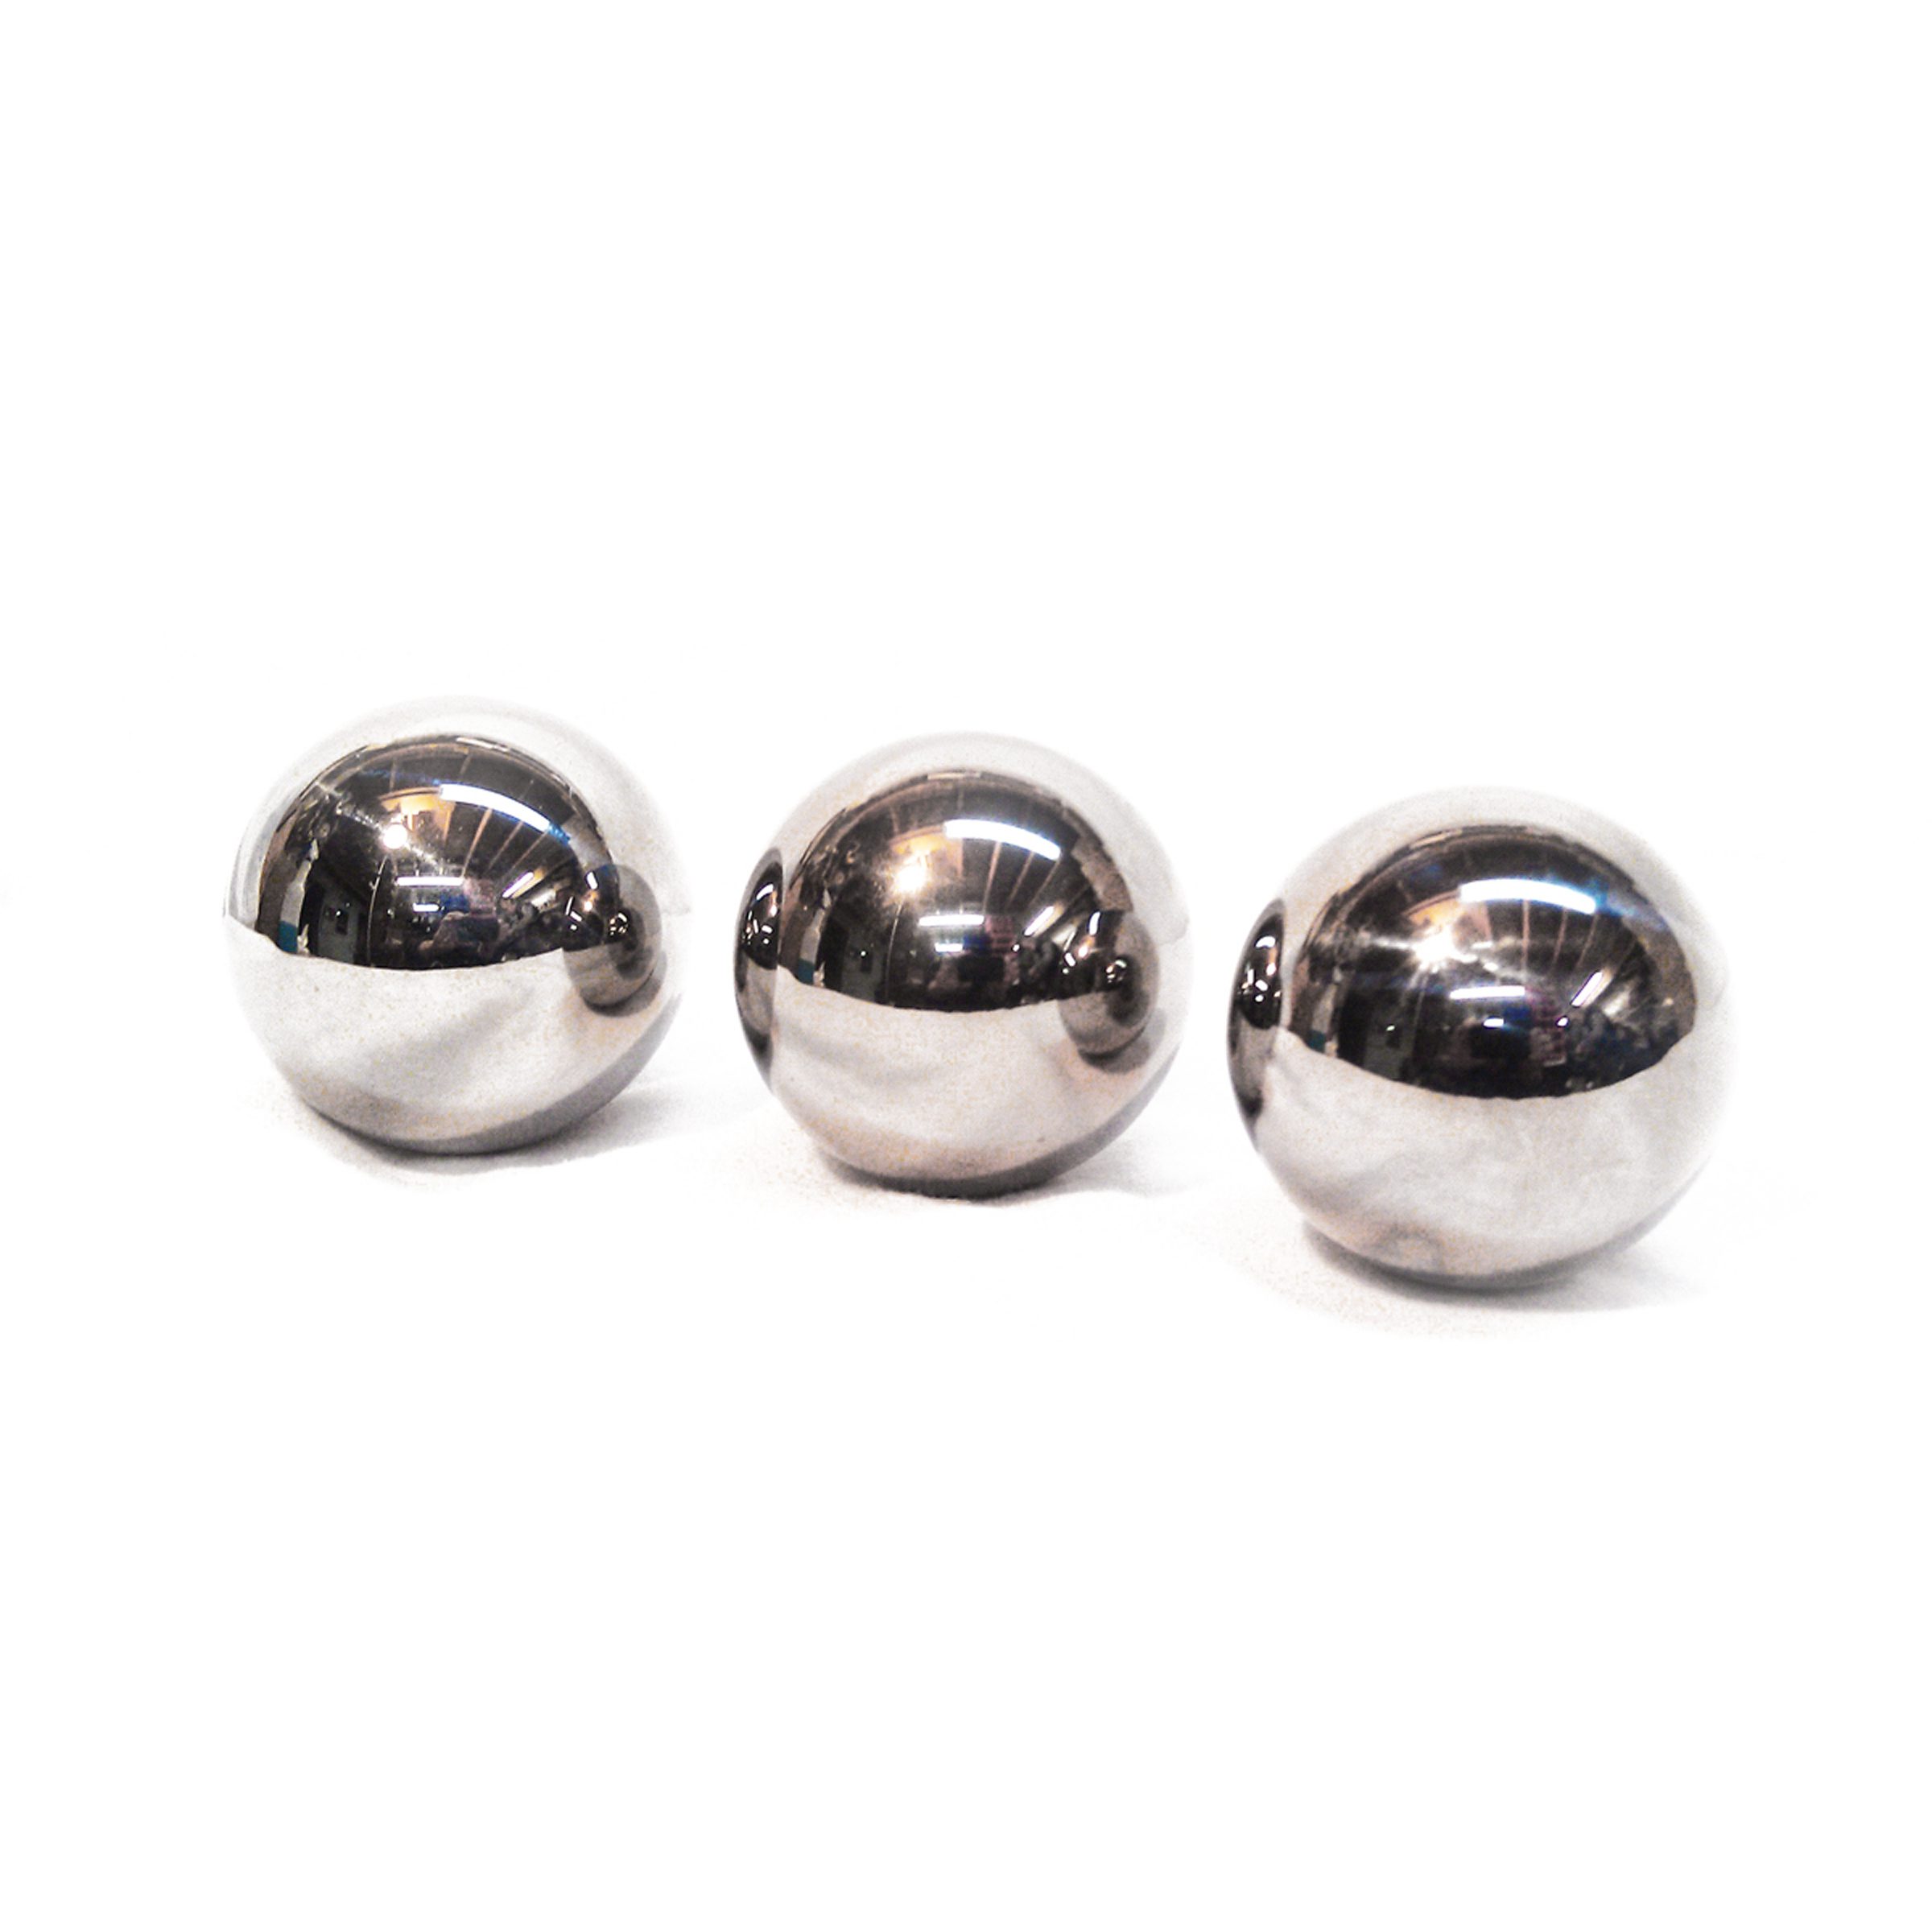 mdrs ball set c 3 solid chrome steel wcase